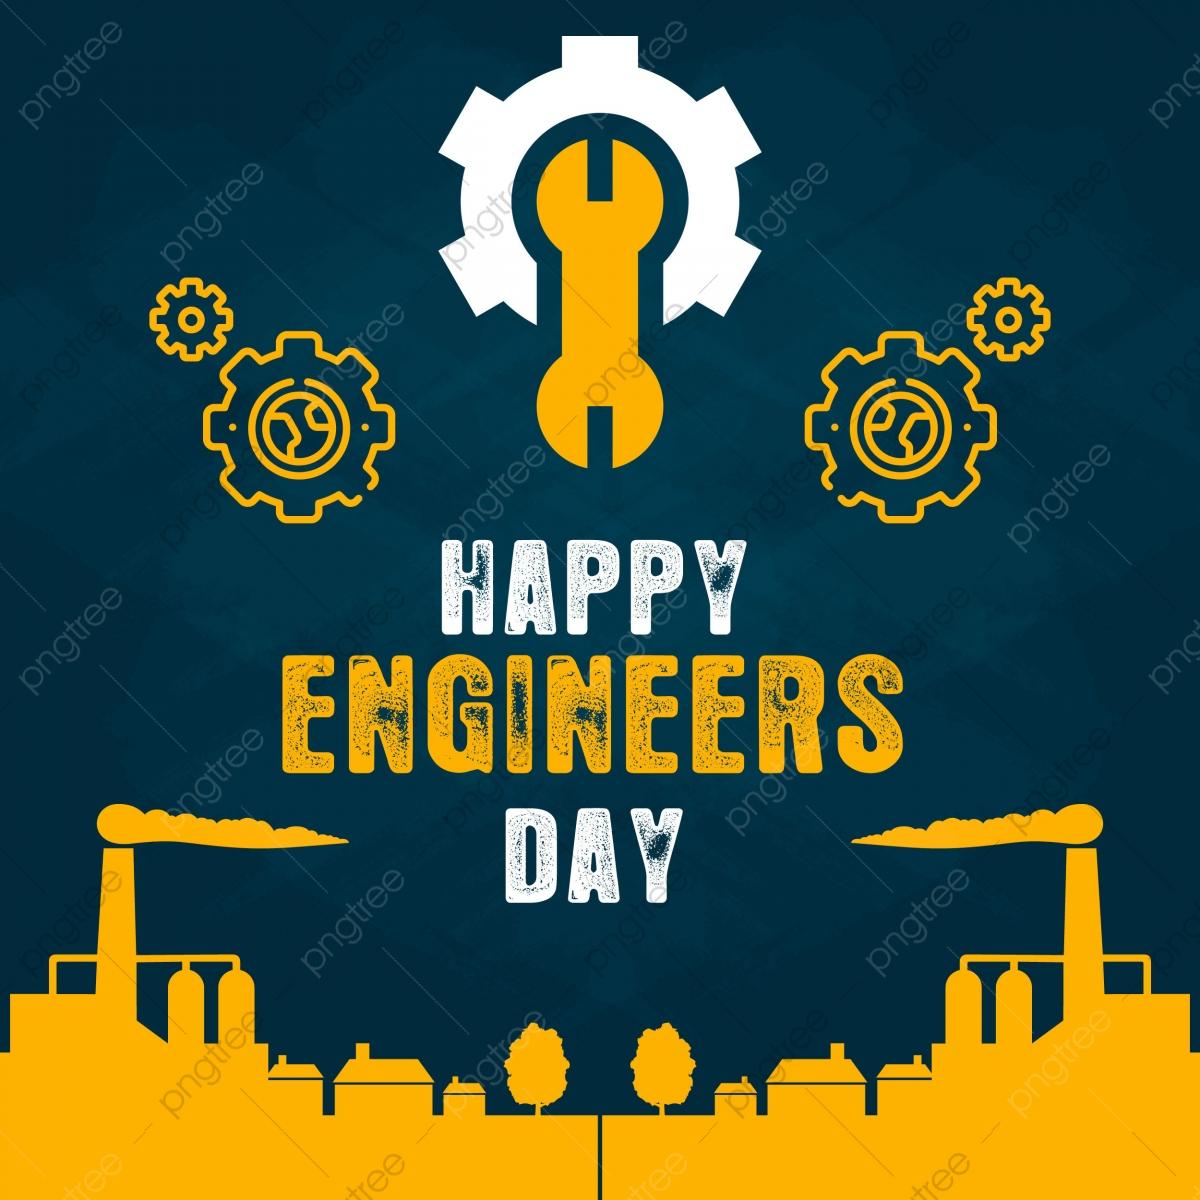 Happy Engineer's Day 2019 : Engineer's Day Quotes, Wishes,Status | Engineers  day quotes, Engineers day, Happy engineer's day